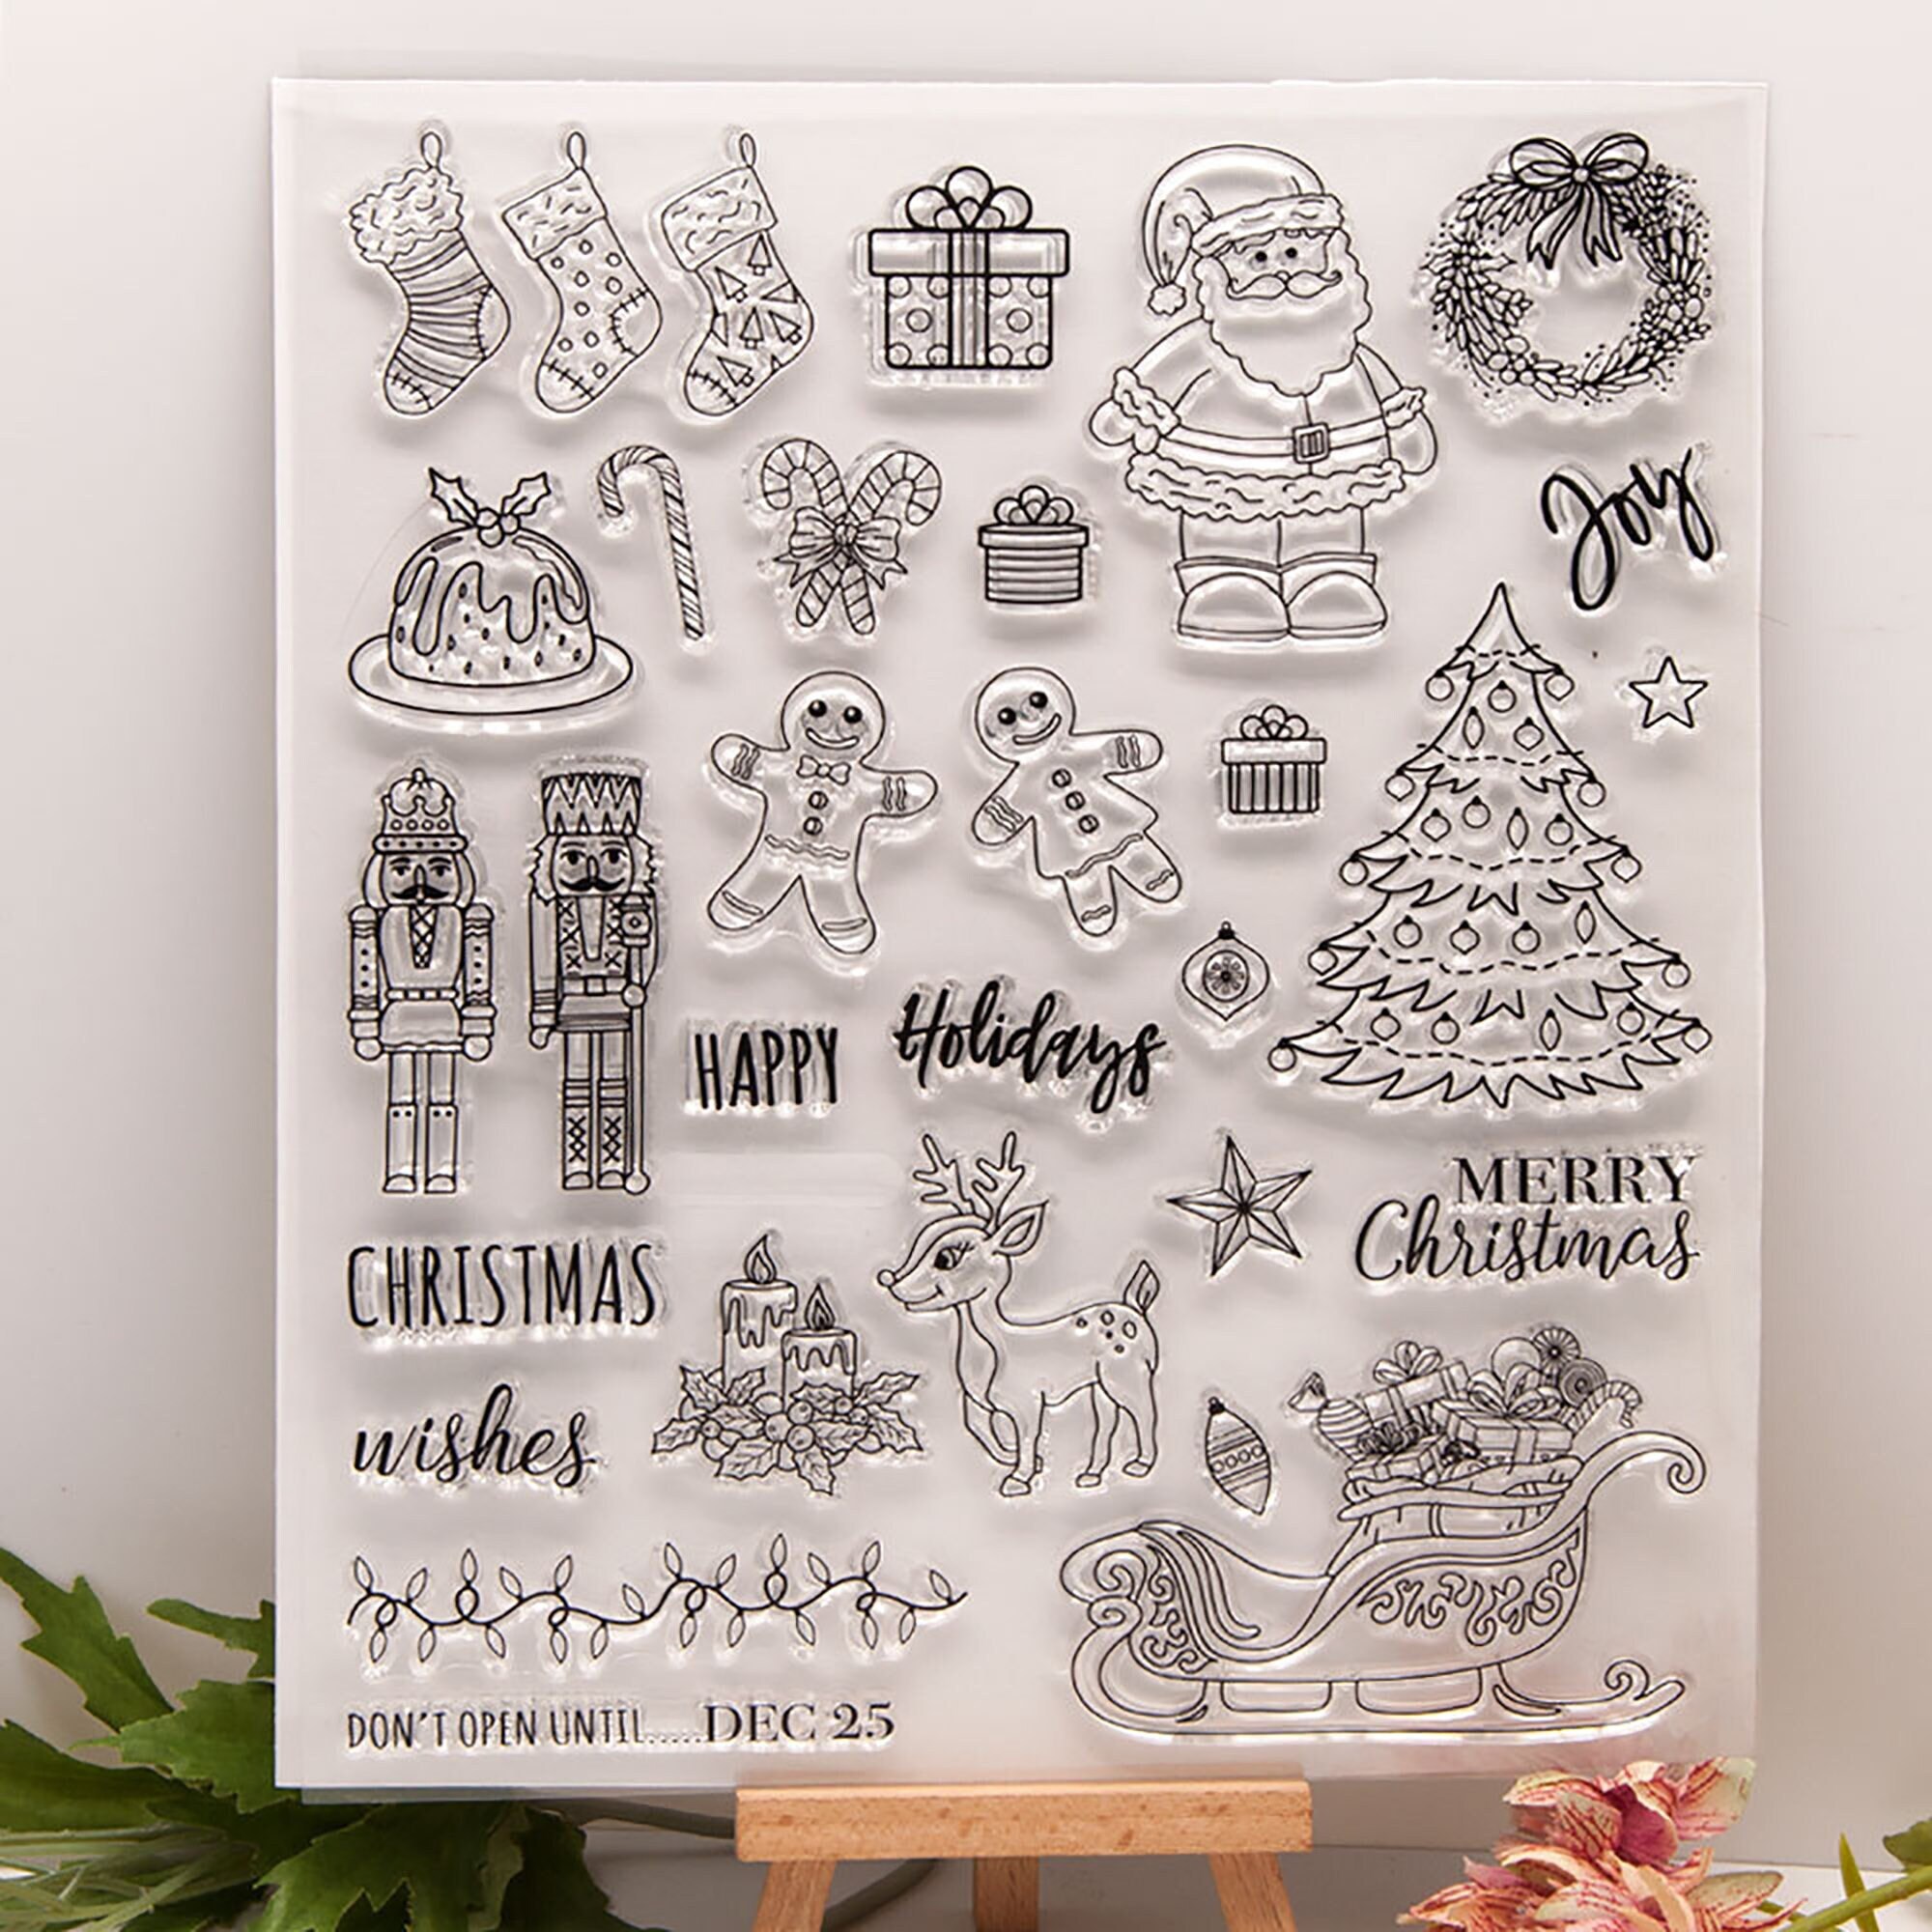 Ogquaton Christmas DIY Silicone Clear Stamp Cling Seal Scrapbook Embossing Album Decor Durable y útil 